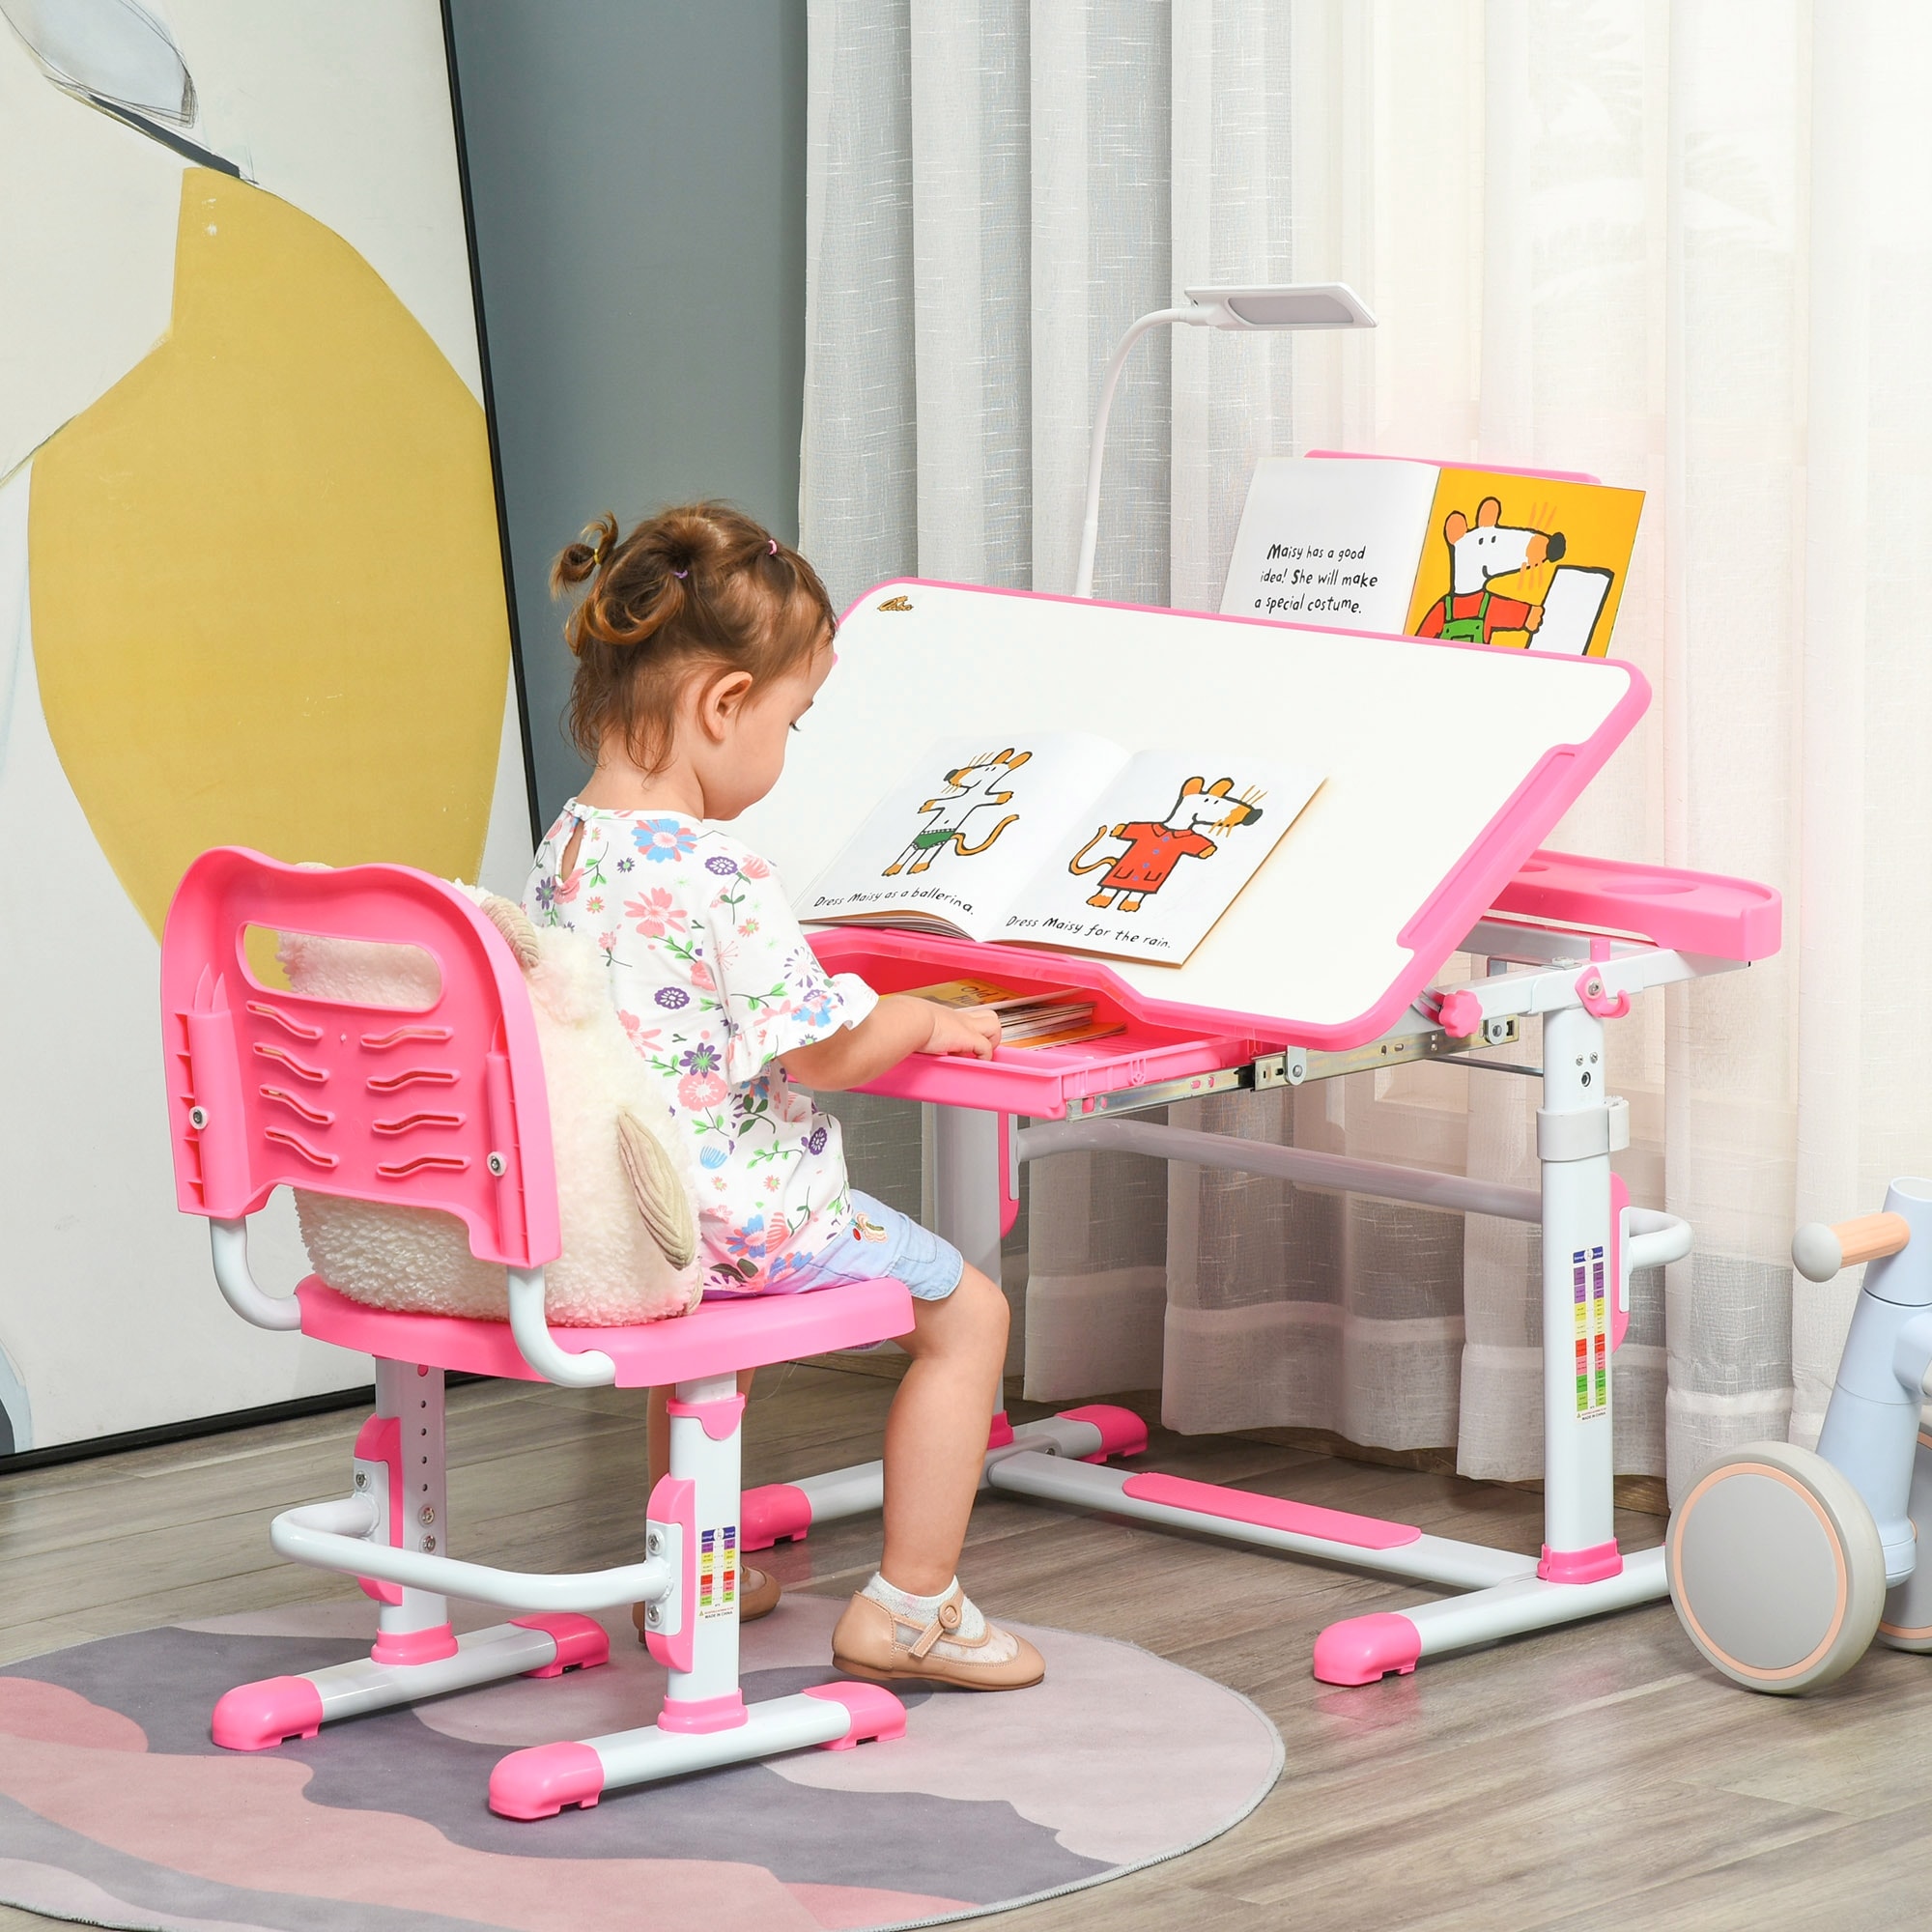 https://ak1.ostkcdn.com/images/products/is/images/direct/3e5080c443fc846c24014a4a290ae8a3c1b8135d/Qaba-Kids-Desk-and-Chair-Set-Height-Adjustable-Children-School-Study-Table-Student-Writing-Desk-with-Tilt-Desktop%2C-LED-Lamp.jpg